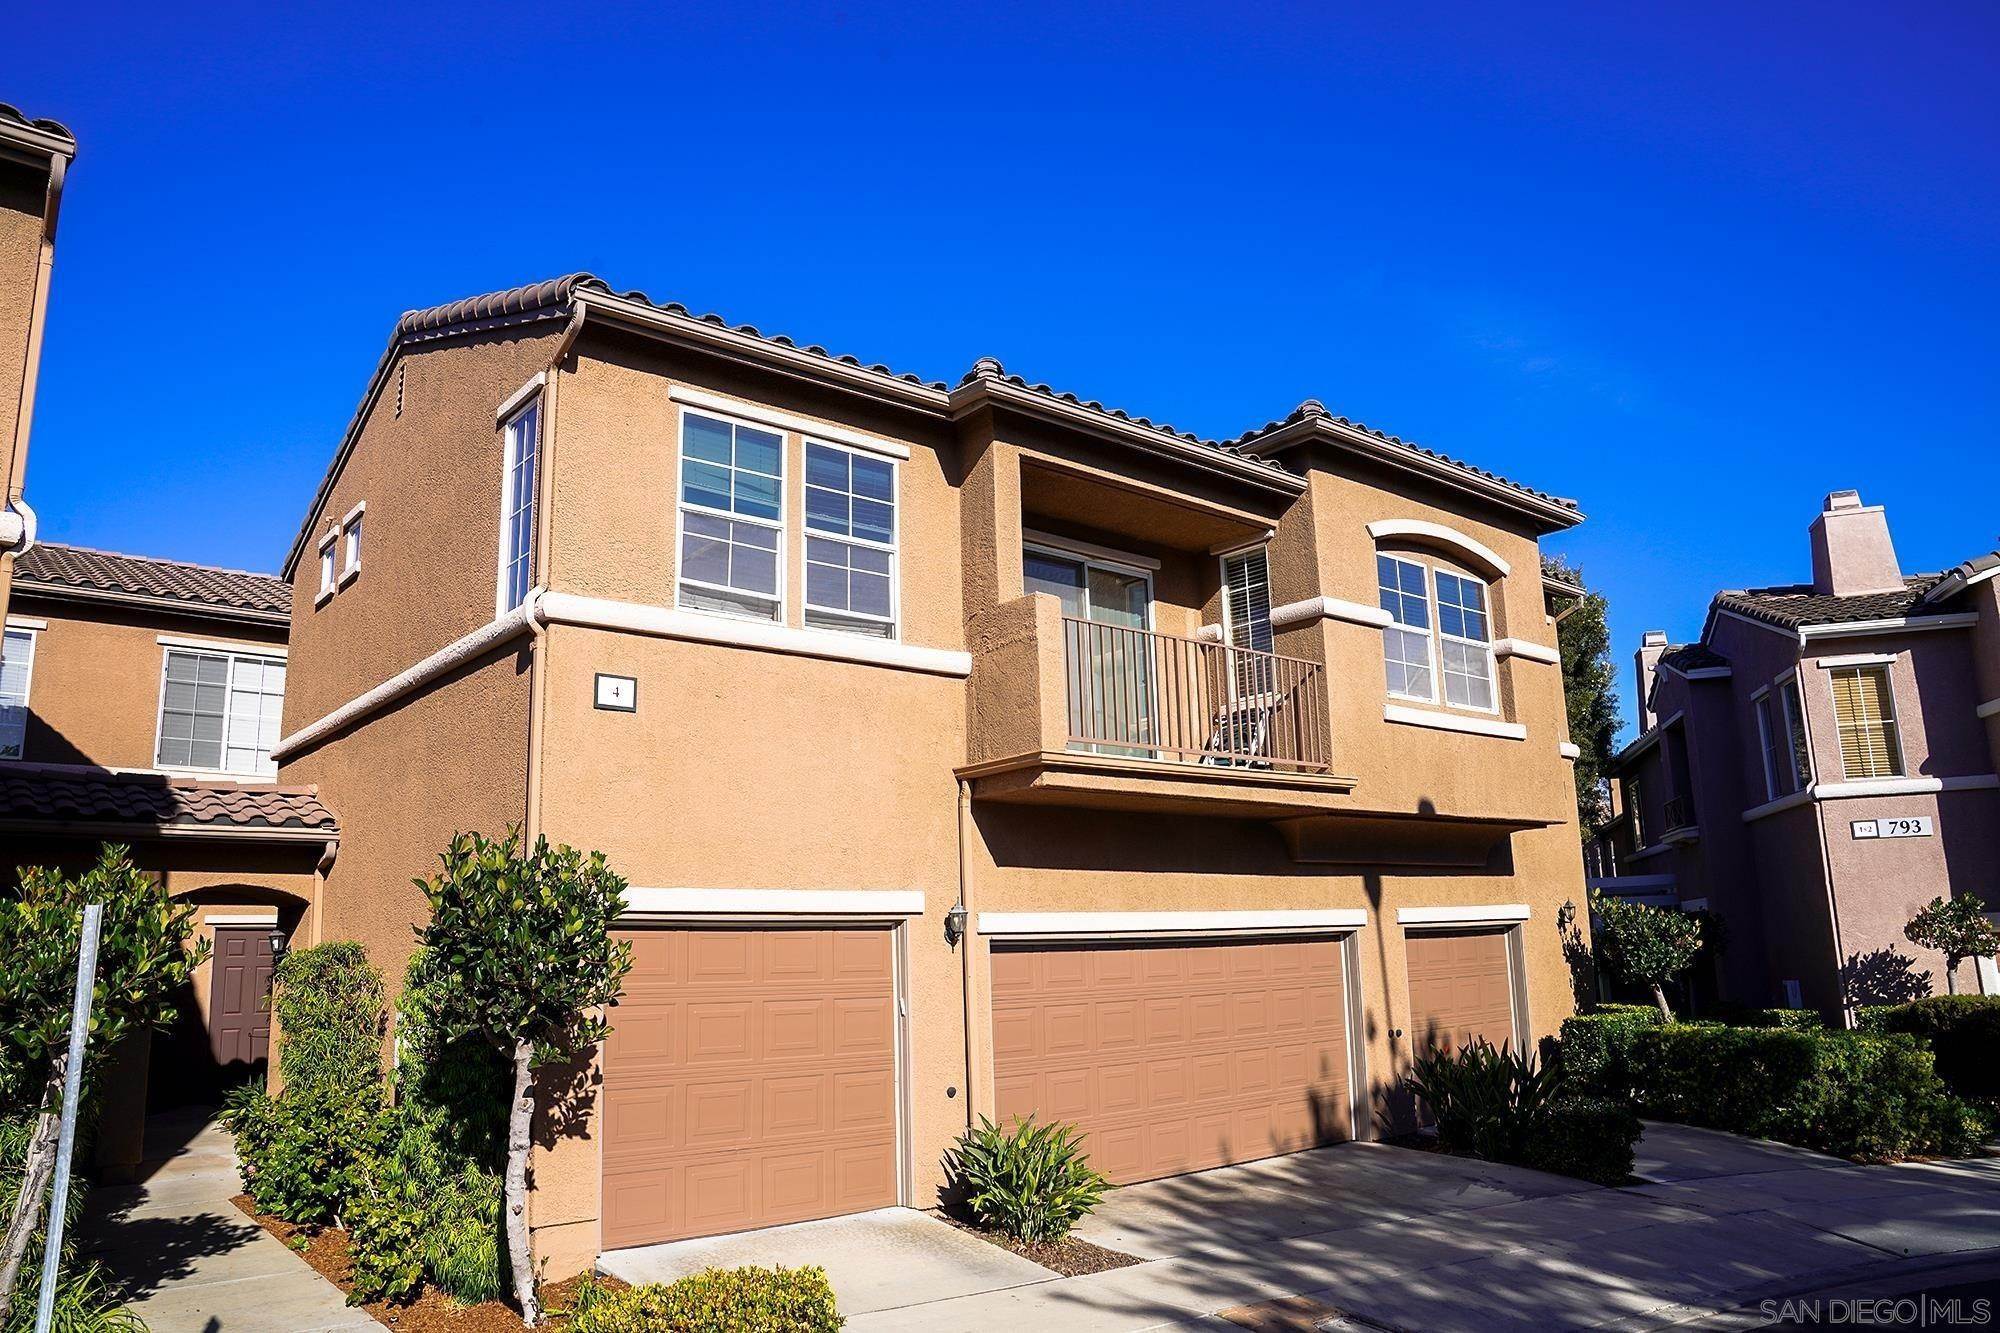 21. Townhouse for Sale at Chula Vista, CA 91913